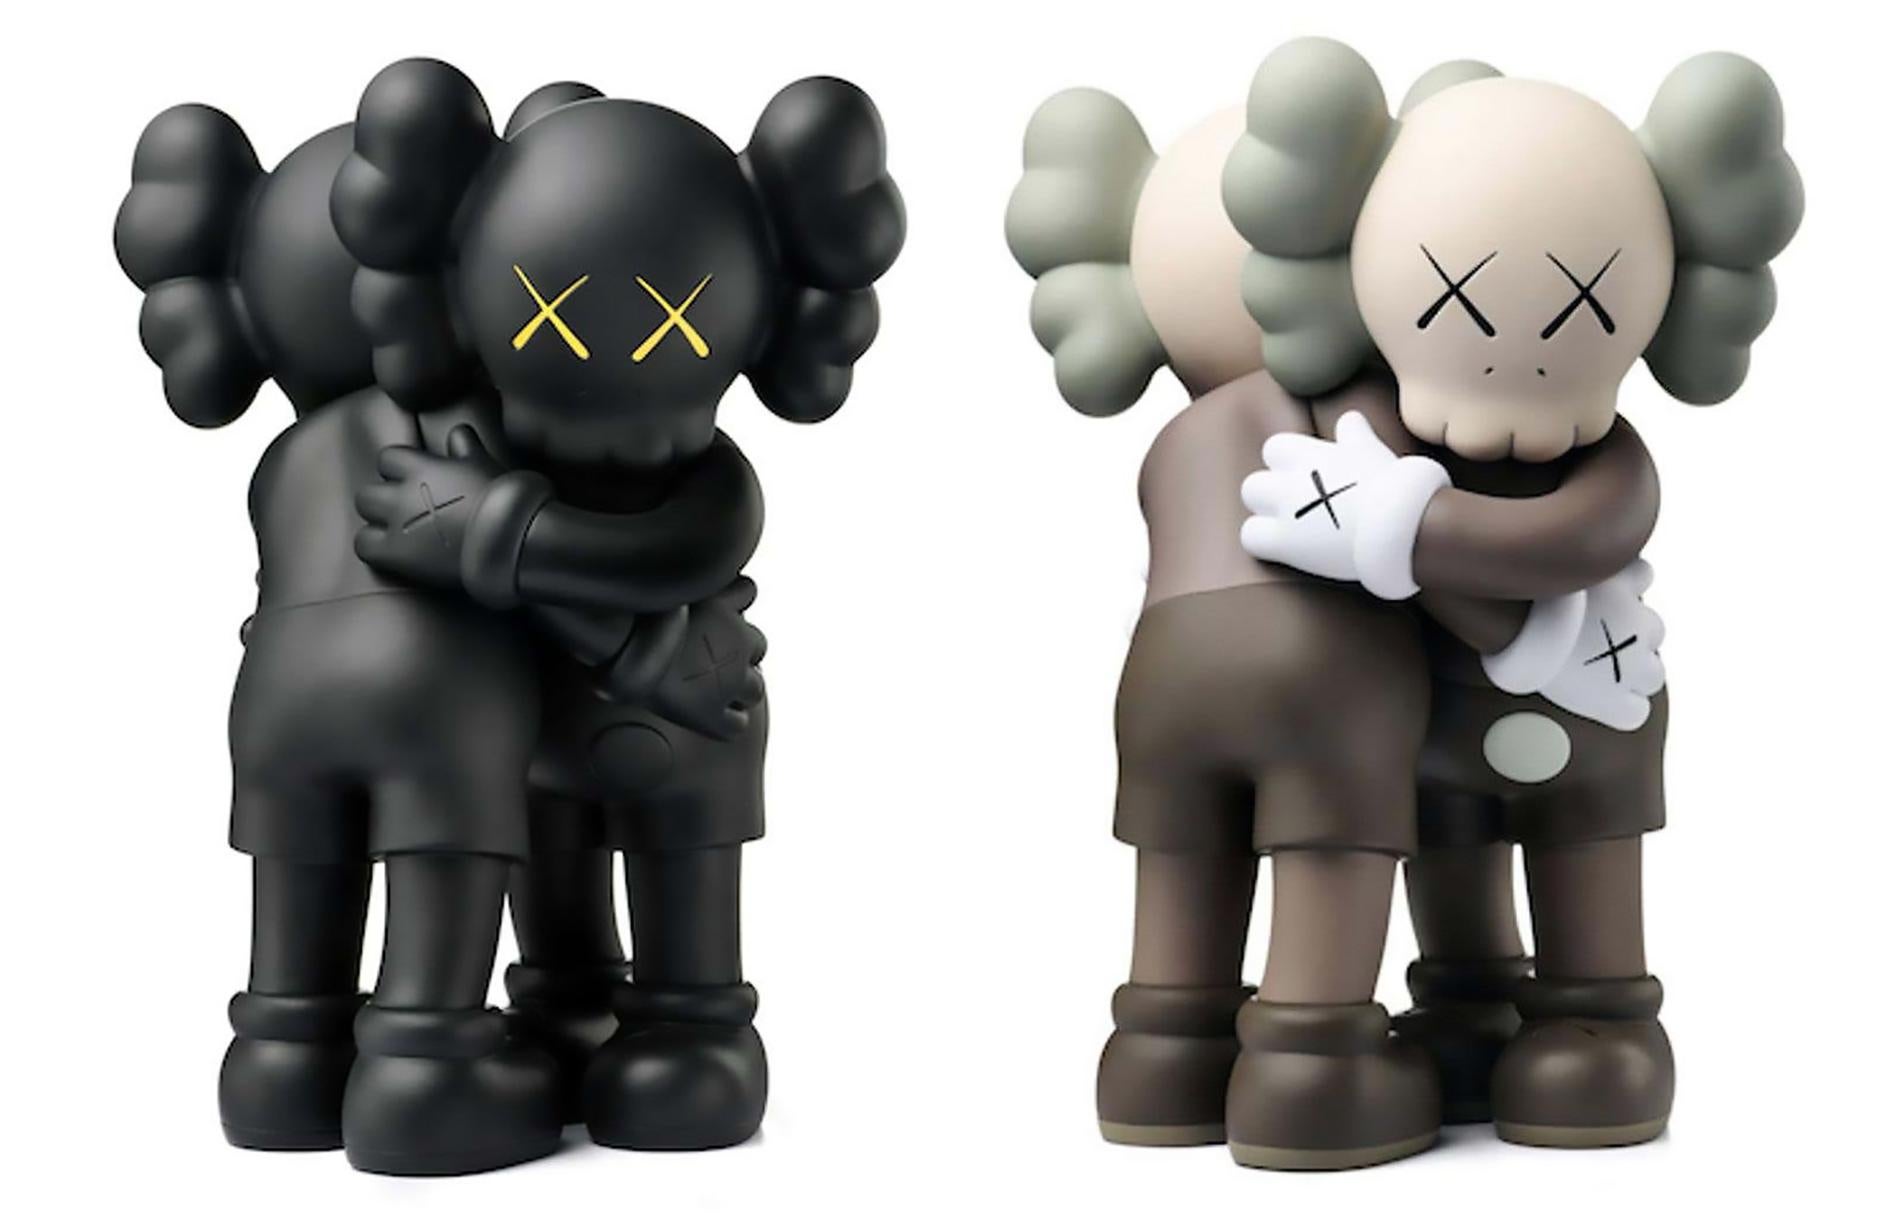 KAWS Together 2018: Set of 2 (Brown & Black):
In KAWS TOGETHER, KAWS’s iconic “Companions” are interlocked, consoling each other in an everlasting hug. KAWS 1st debuted this embracing duo in 2016, presenting large-scale wooden versions at More